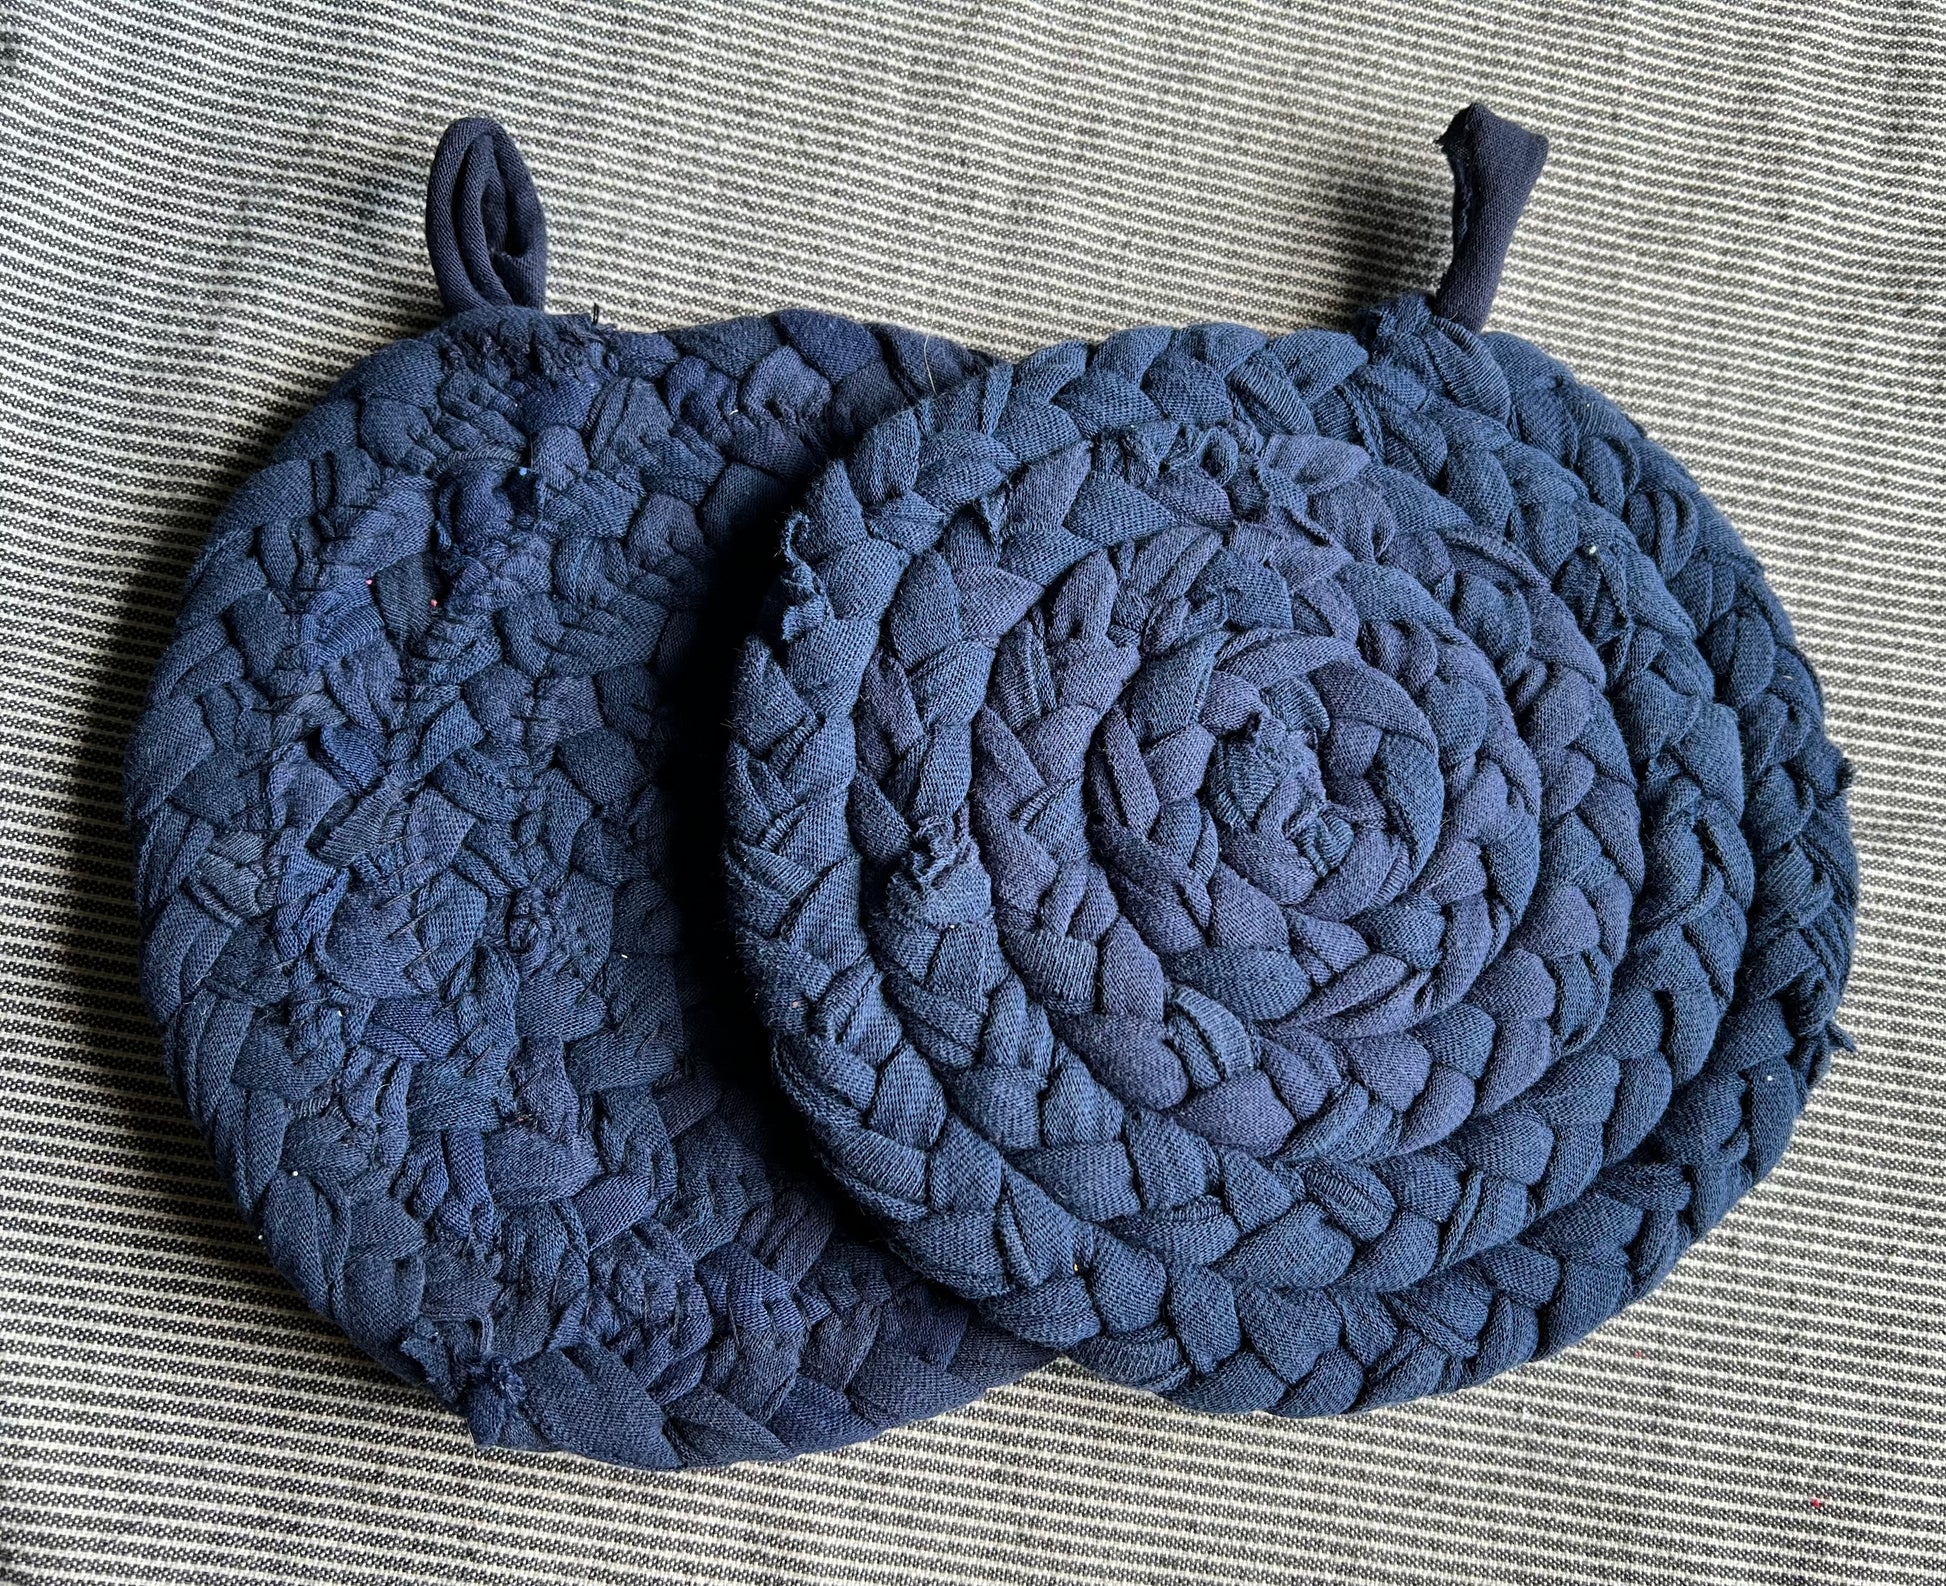 A set of two trivet potholders, side by side, lay flat on a fabric surface.